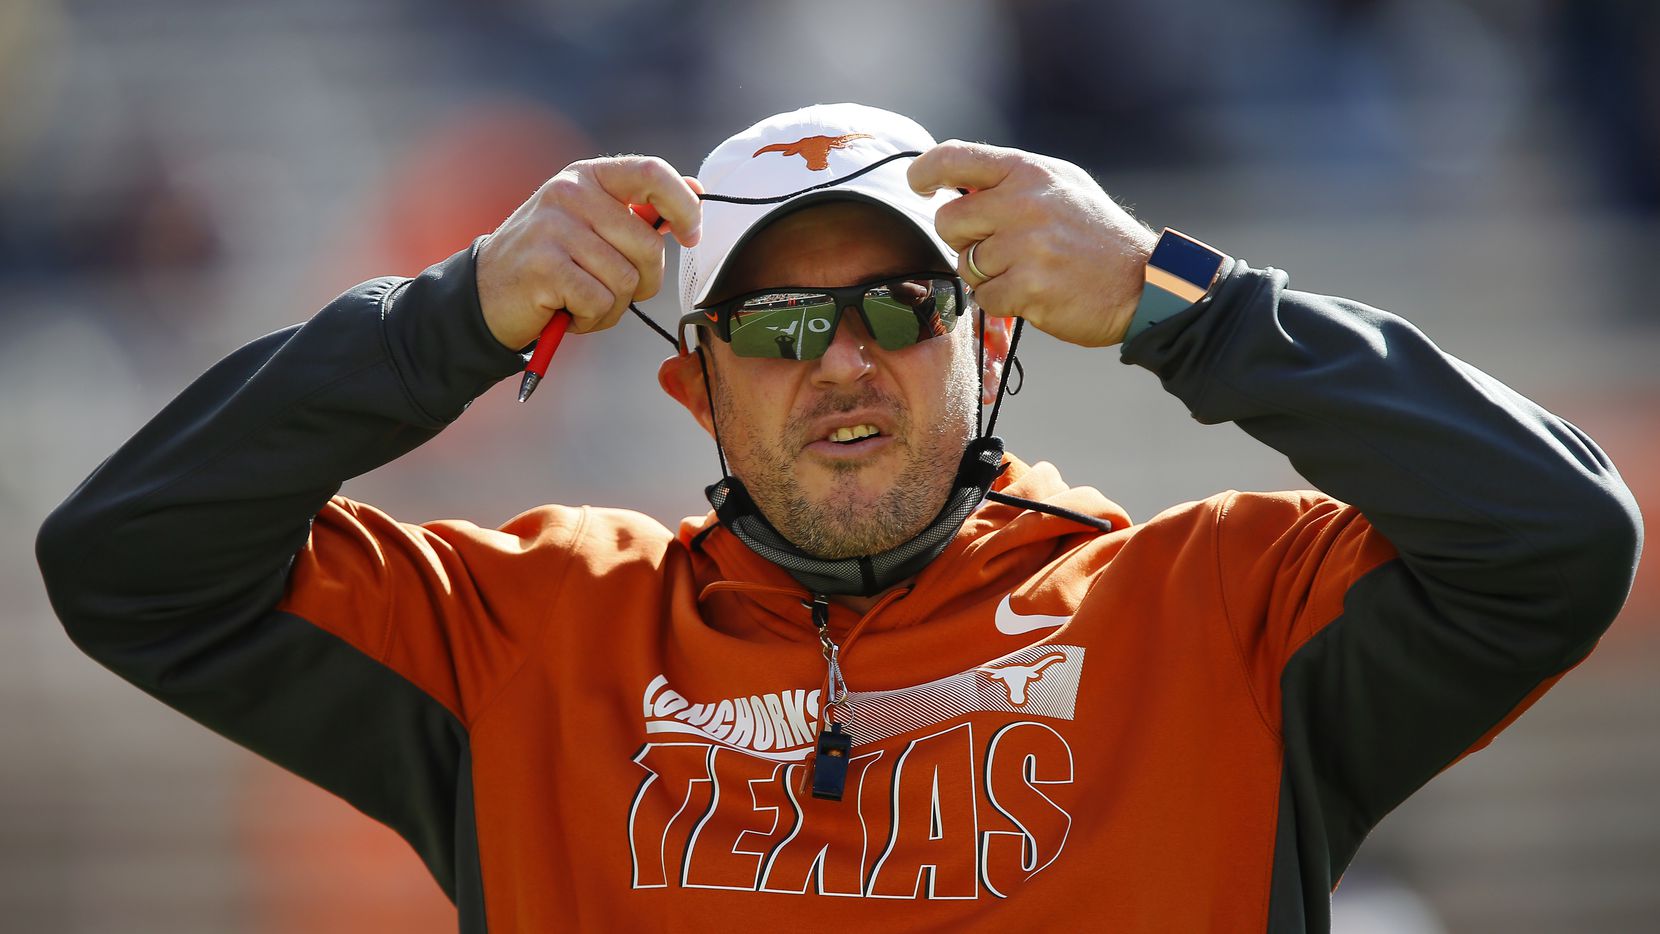 STILLWATER, OK - OCTOBER 31:  Head coach Tom Herman of the Texas Longhorns perpares for a game against the Oklahoma State Cowboys at Boone Pickens Stadium on October 31, 2020 in Stillwater, Oklahoma.  (Pool Photo by Brian Bahr/Getty Images) EDITORIAL USE ONLY  *** Local Caption *** Tom Herman